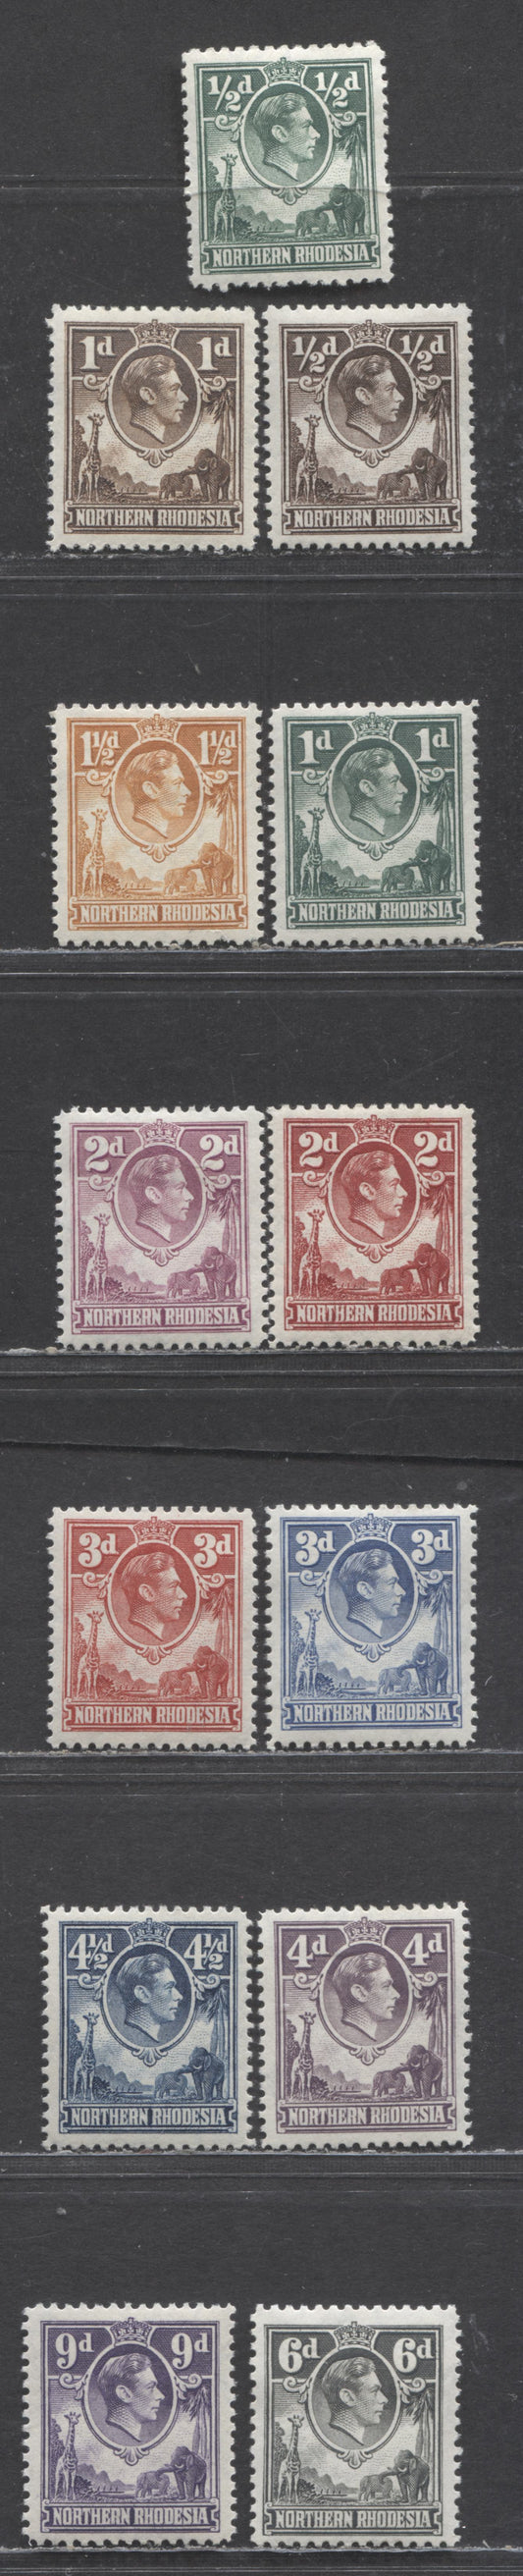 Lot 84 Northern Rhodesia SC#25/39 1938-1952 King George VI & Zambezi River Definitives, 13 VFOG Singles, Click on Listing to See ALL Pictures, 2017 Scott Cat. $8.95